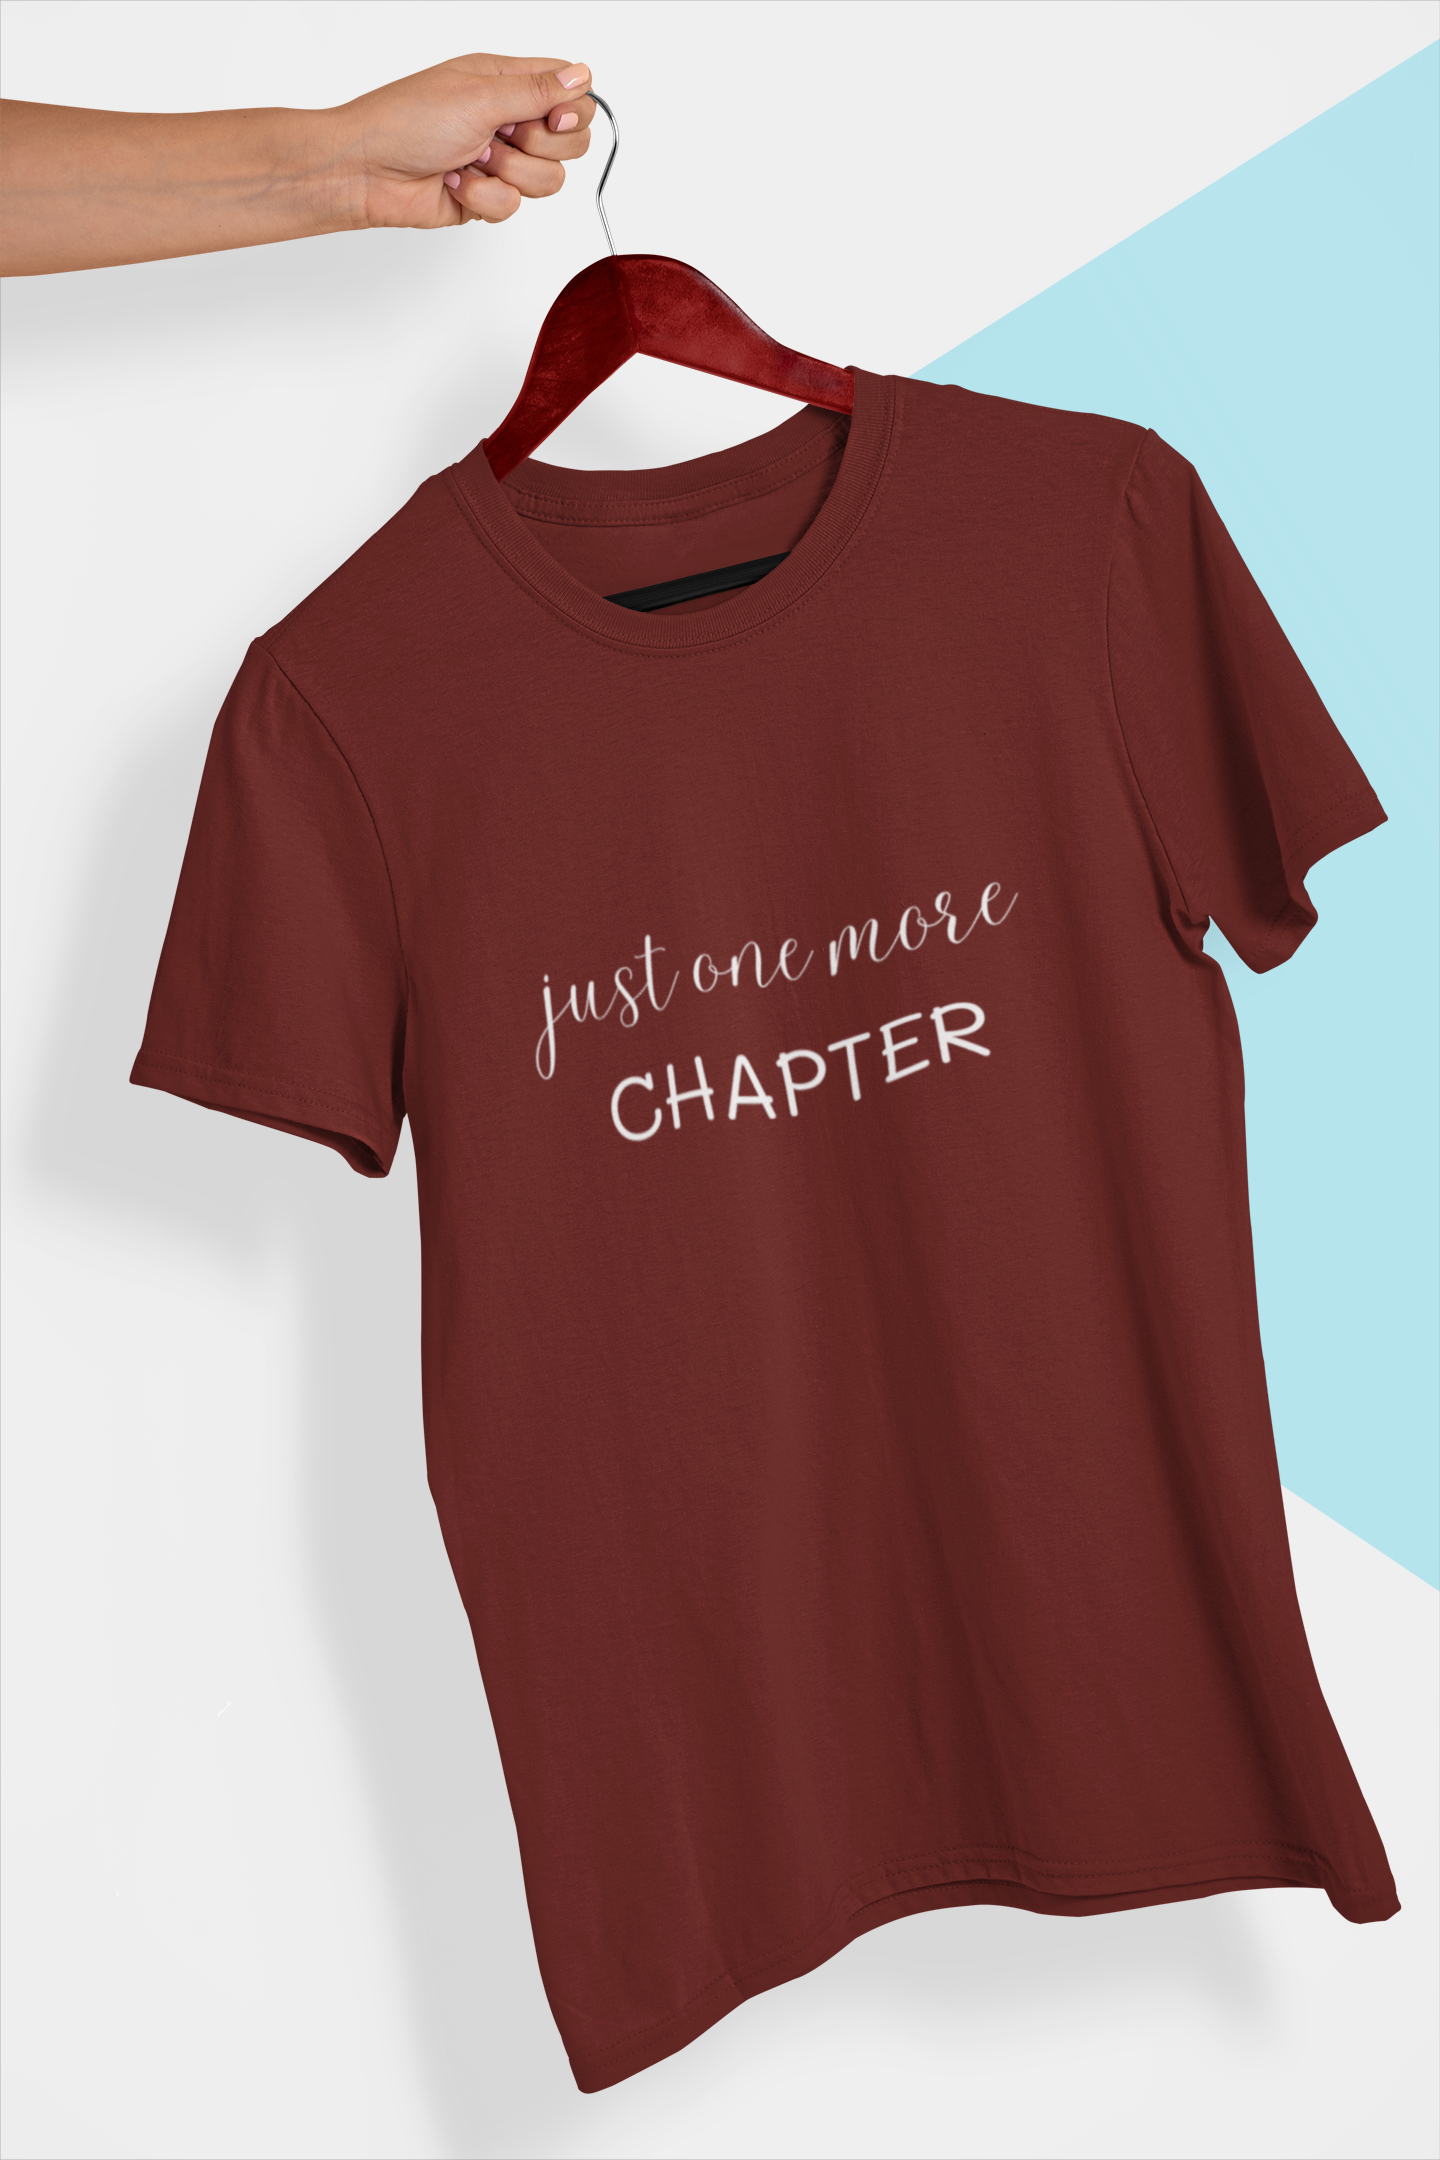 Just one more Chapter Tshirt